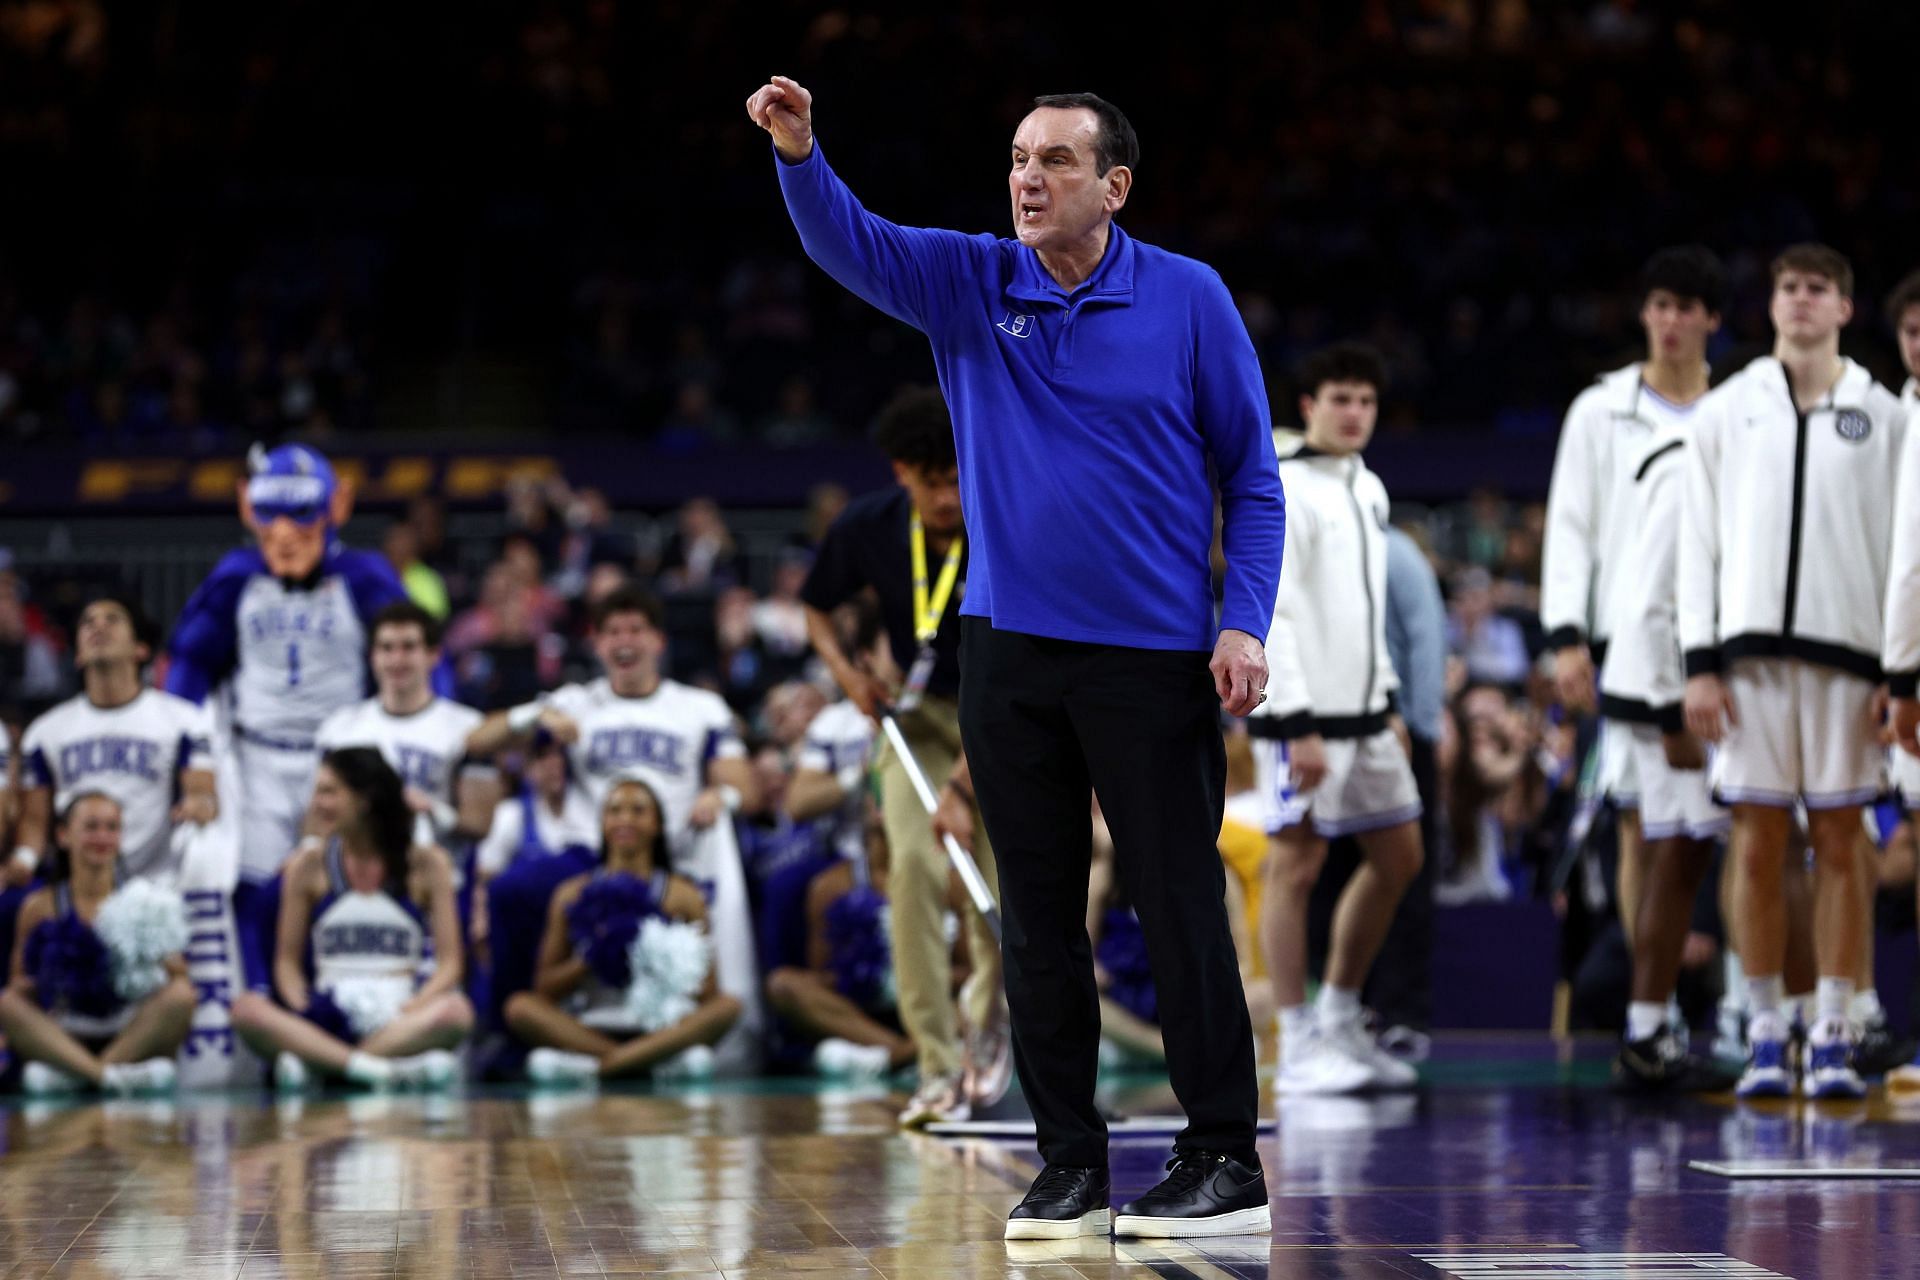 With Coach K&#039;s retirement, many people speak about what made him so great.